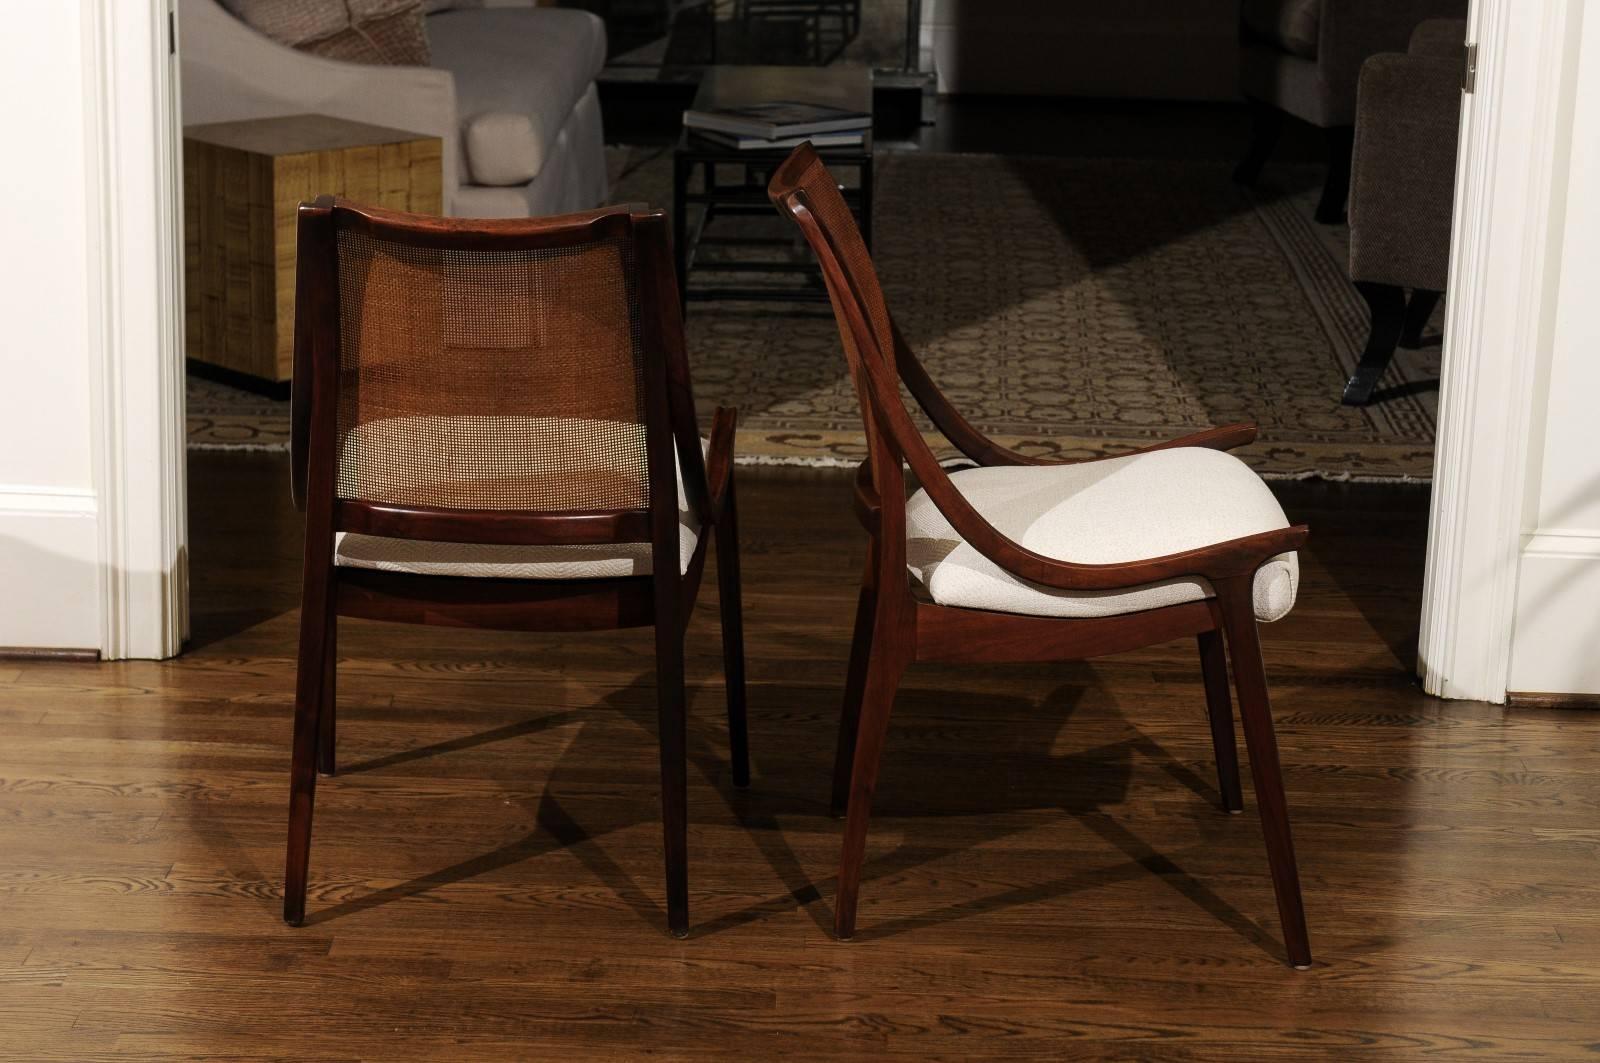 Exquisite Set of Eight Cane Chairs by John Kapel for Glenn of California 1